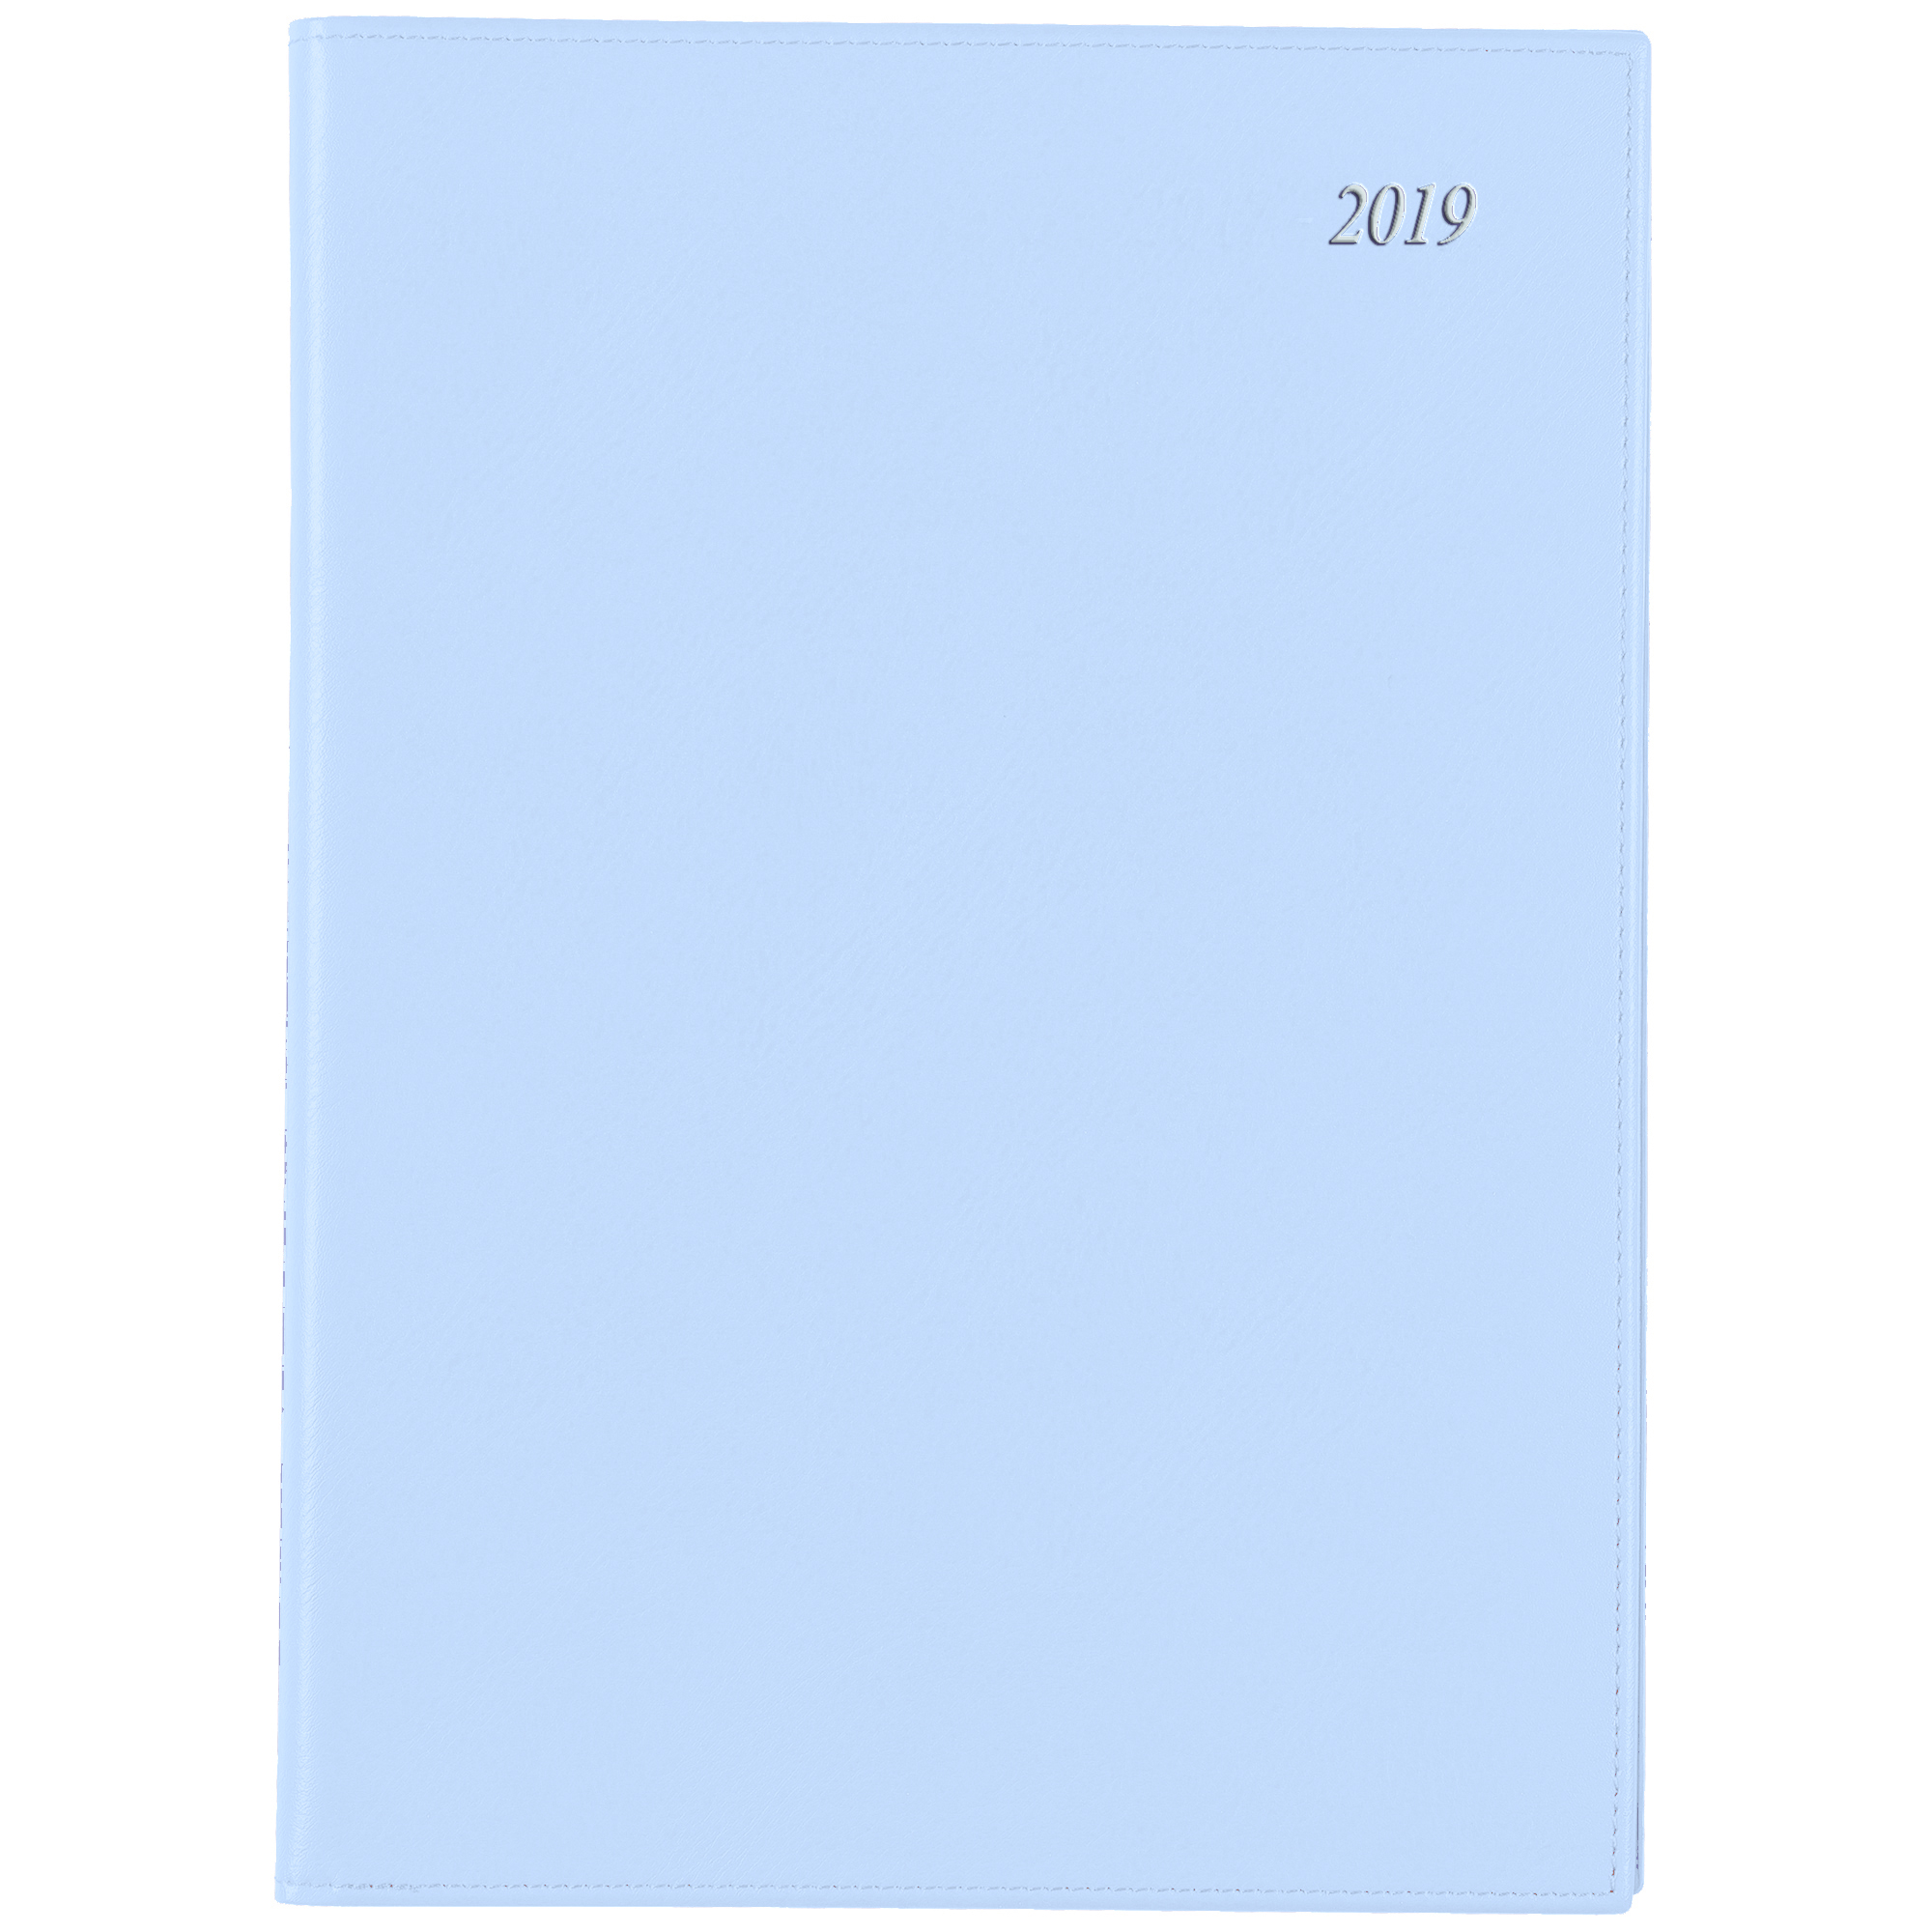 Cumberland A4 Soho Wiro DTP Assorted 2020/21 Financial Year Diary